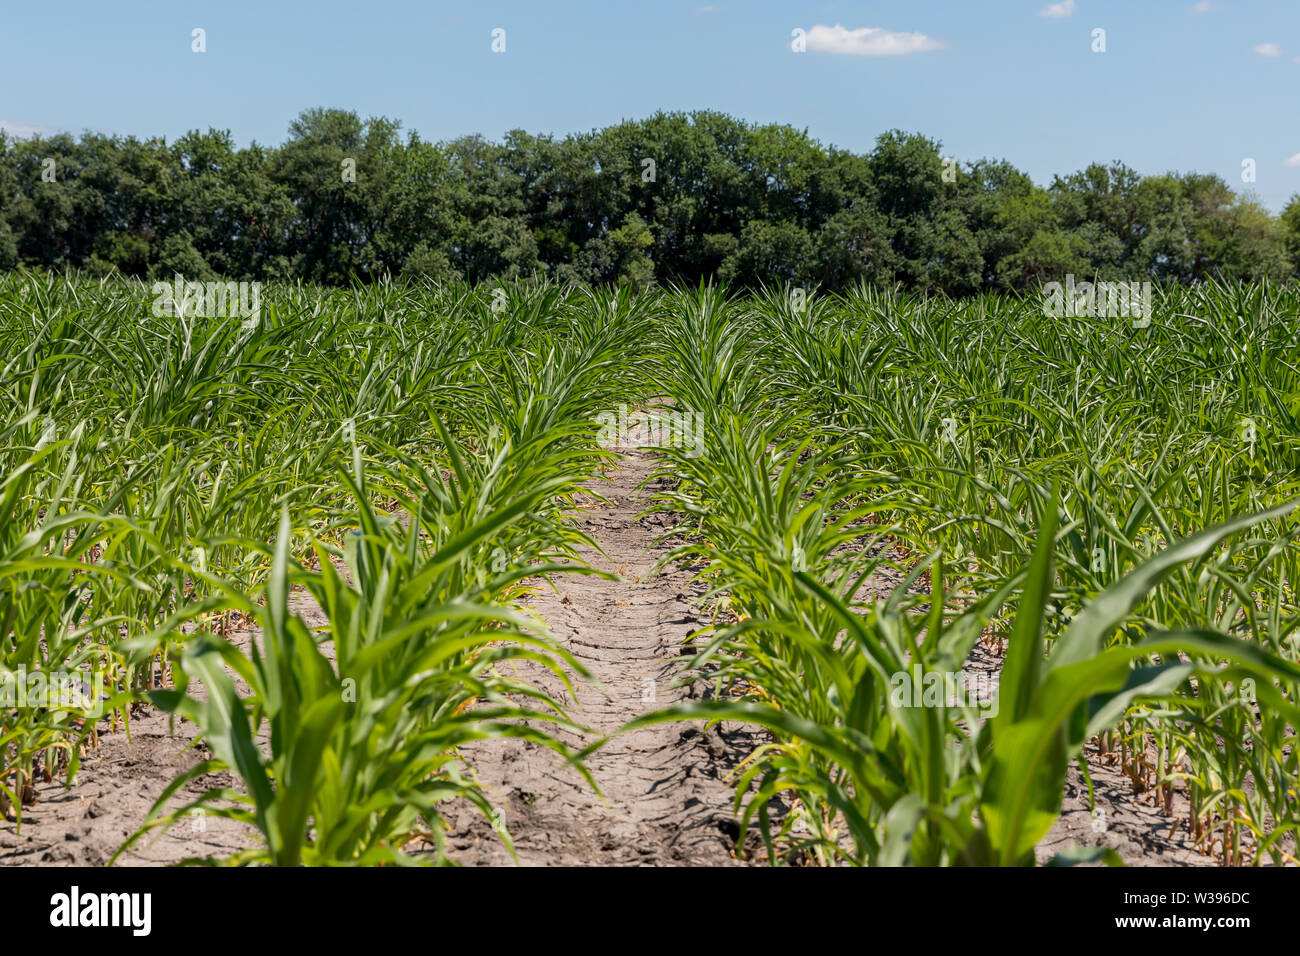 Corn field with corn leaves curling up due to dry, hot weather in Midwest Stock Photo